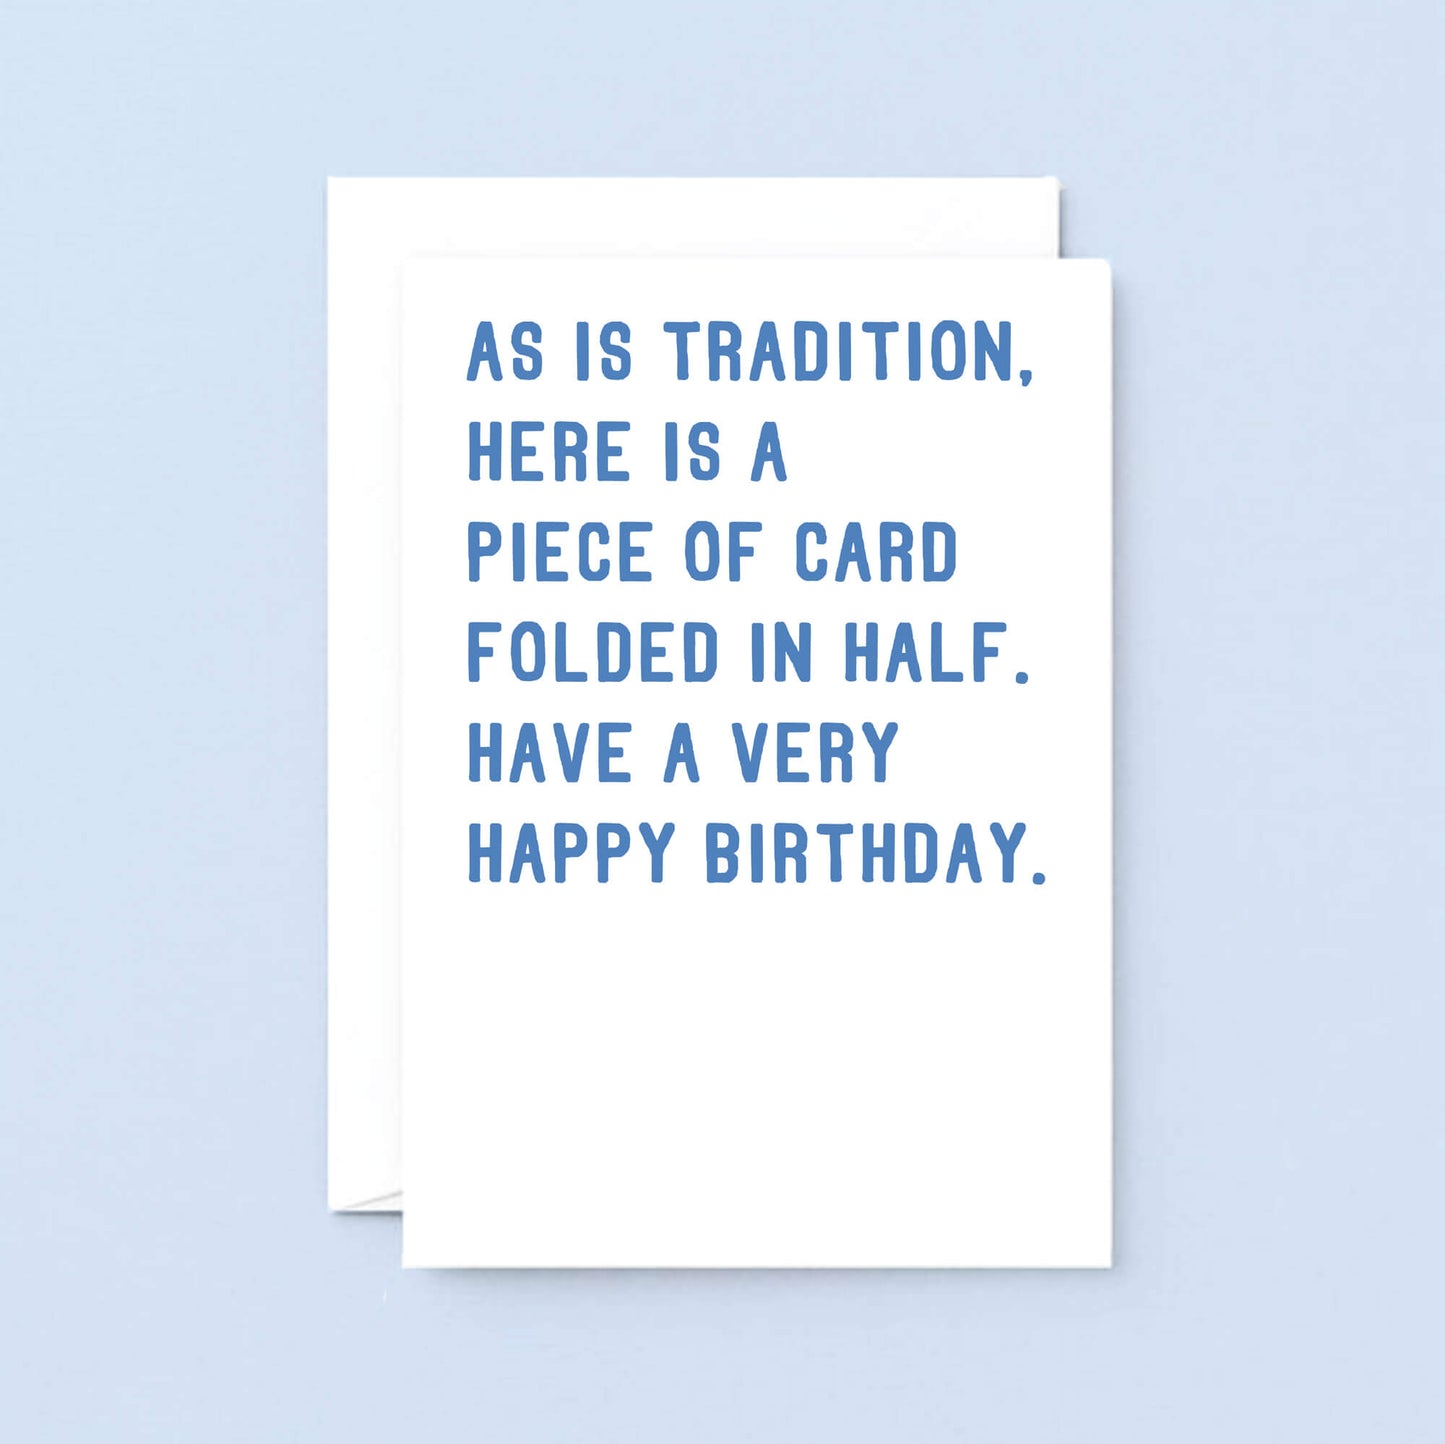 Big Birthday Card by SixElevenCreations. Reads As is tradition, here is a piece of card folded in half. Have a very happy birthday. Product Code SE2005A5